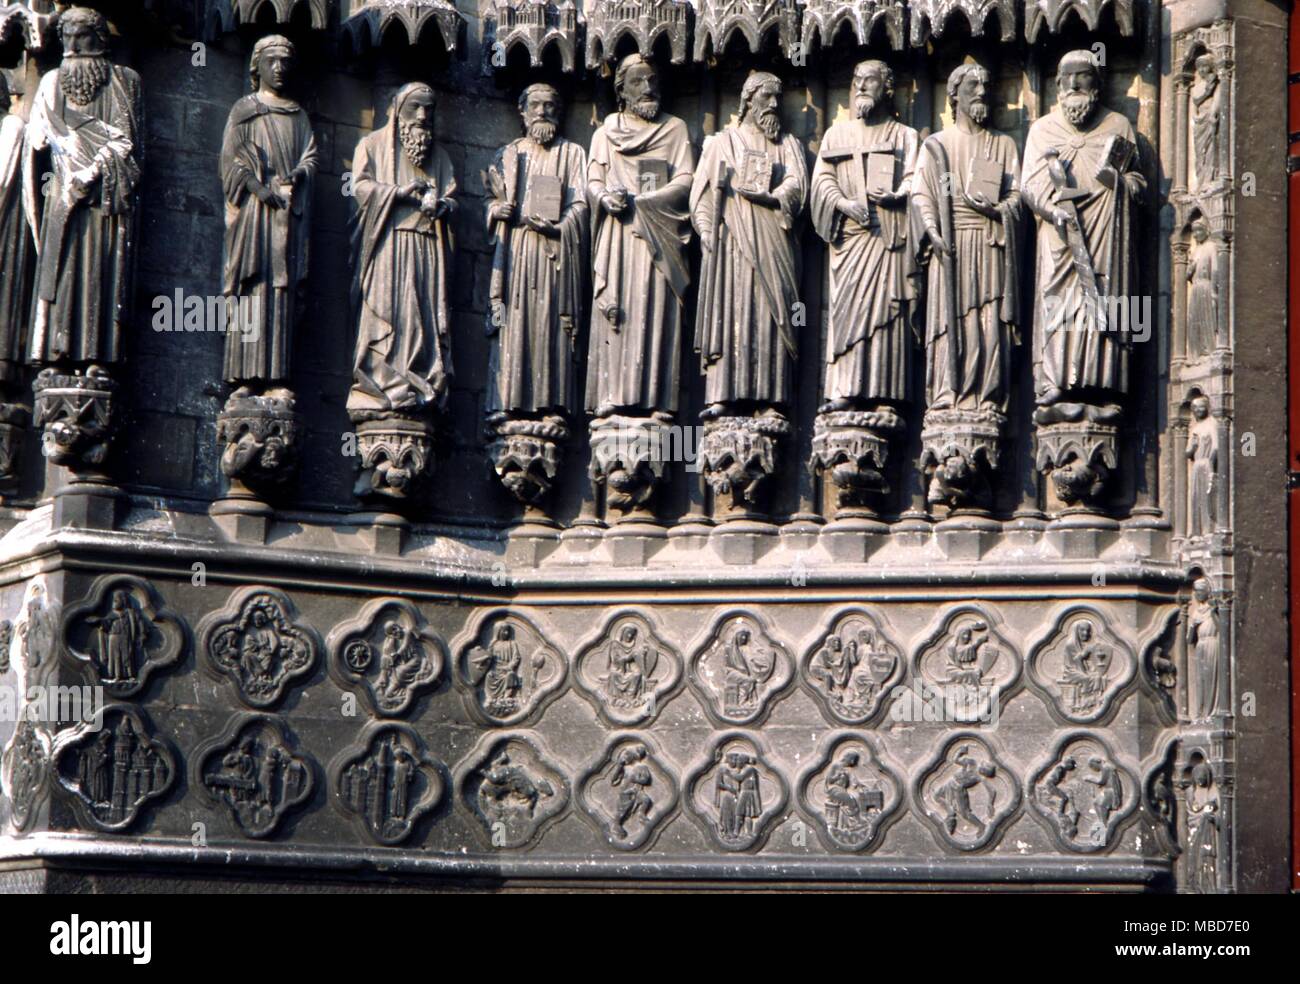 The alchemical central porch of the Cathedral at Amiens. For details of meaning, see Fulcanelli's 'Le Mystere des Cathedrales', 1971. Stock Photo